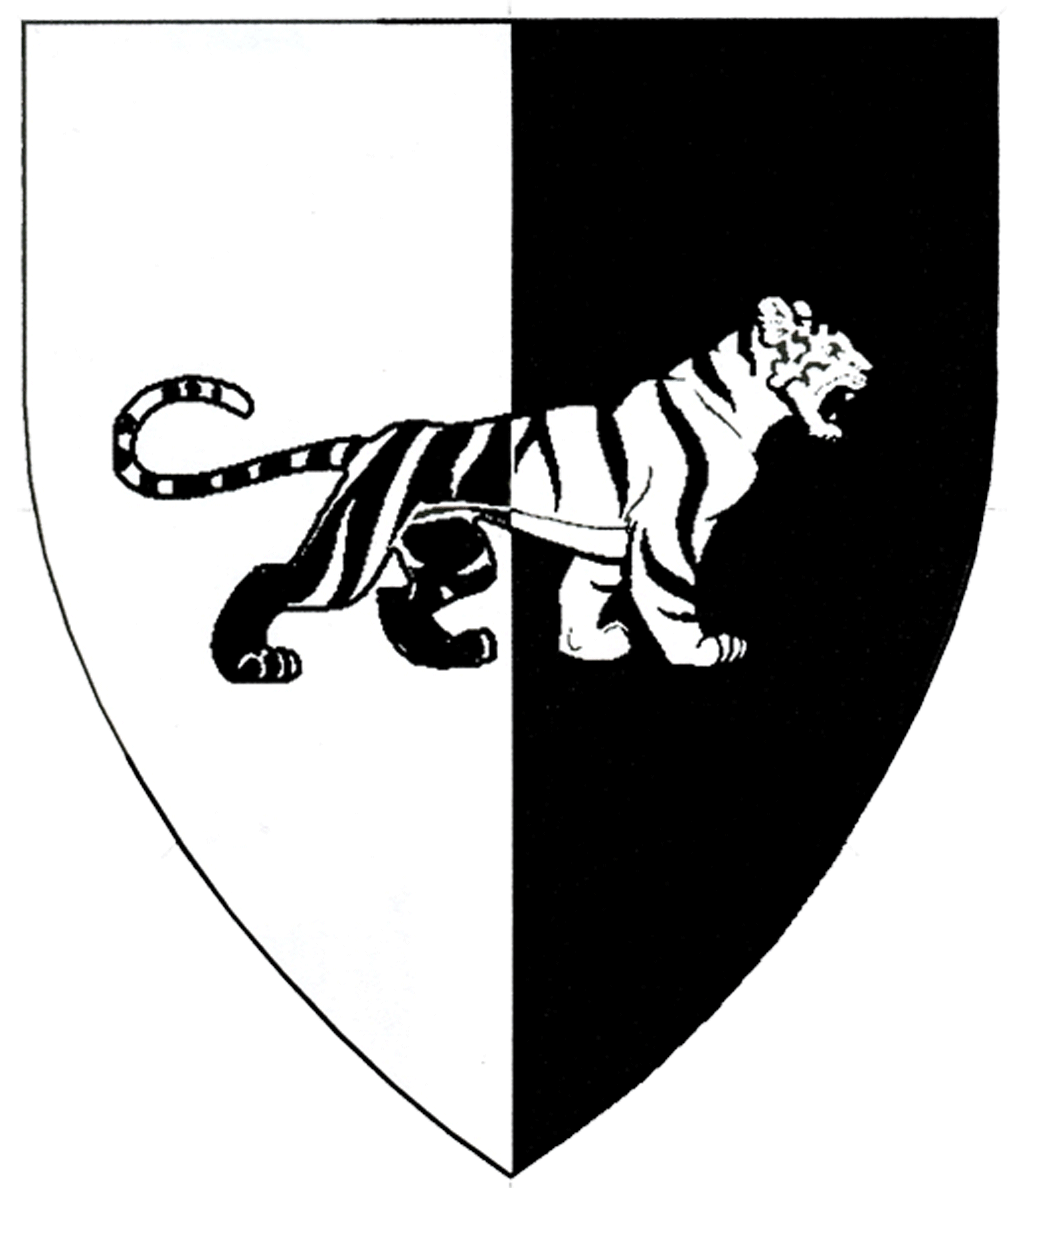 The arms of Dalphina Delacroix